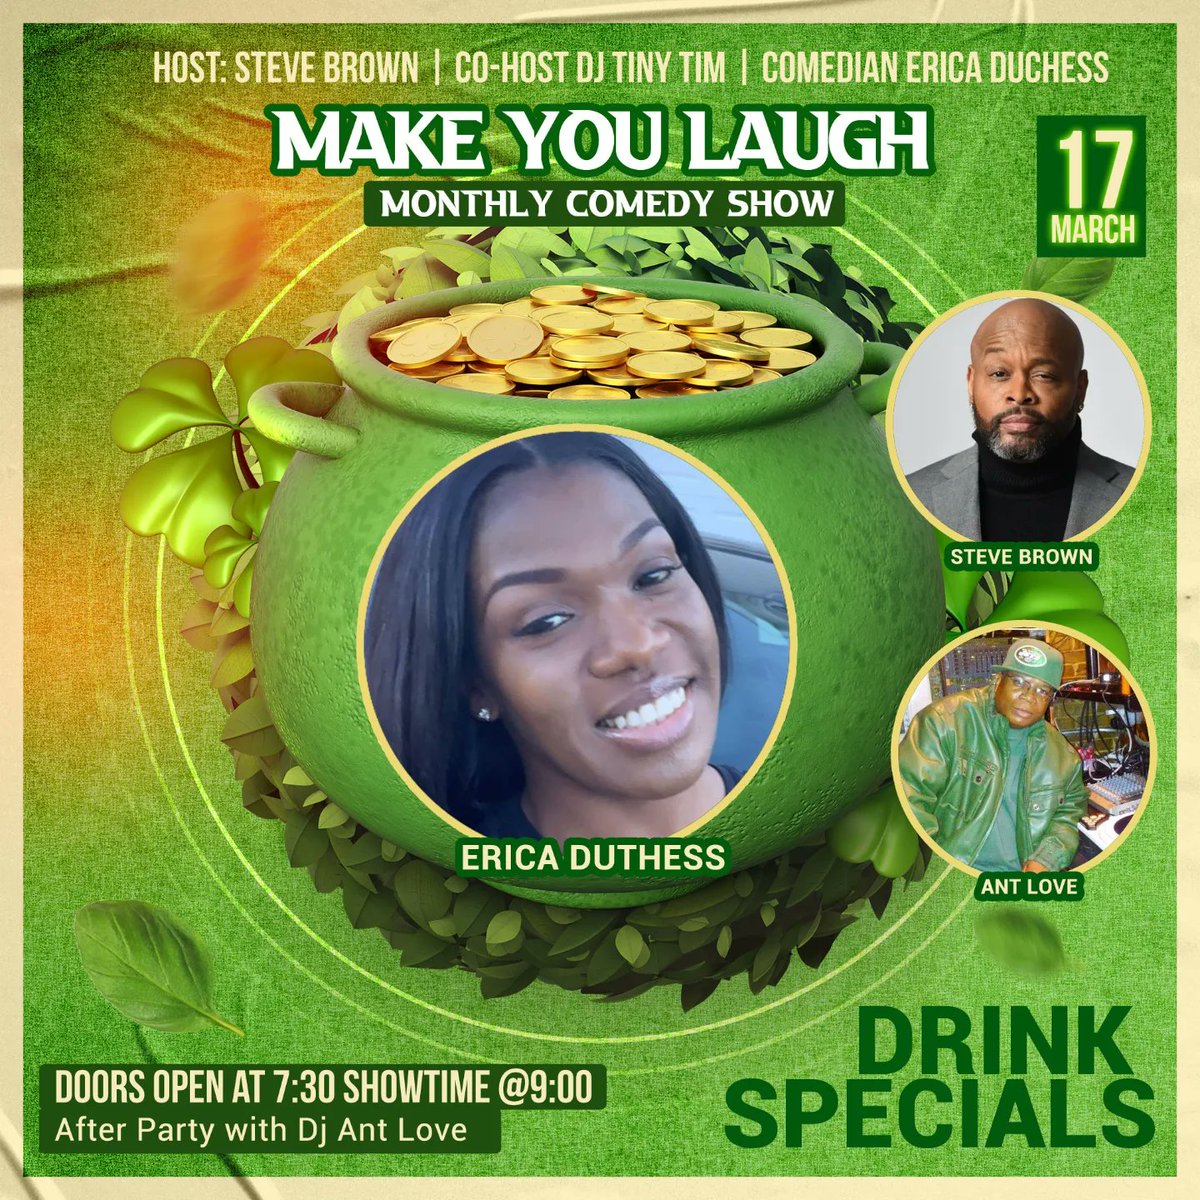 It's goes down with the #jokequeen @ericaduchess Thursday, March 17 (St. Patrick's day) at Milans Lounge in Stockbridge